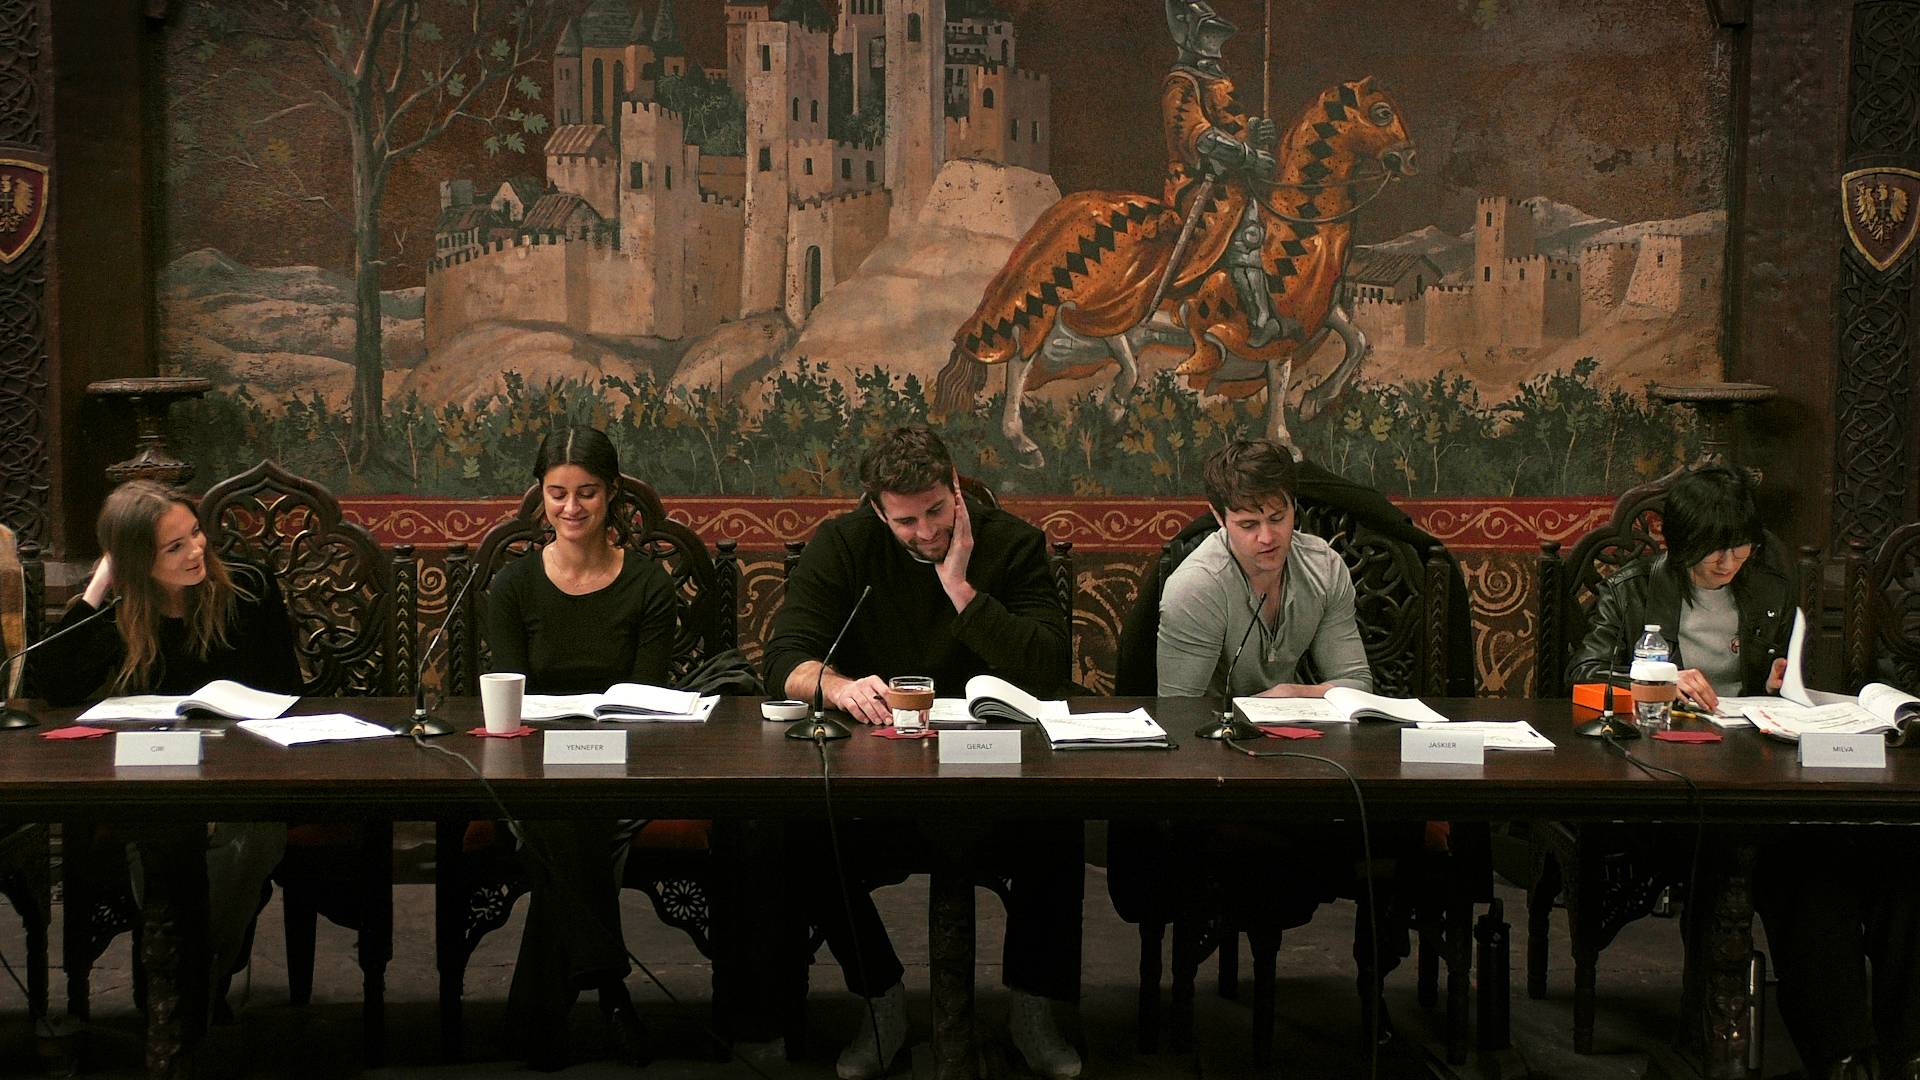 The Witcher read through embargoed